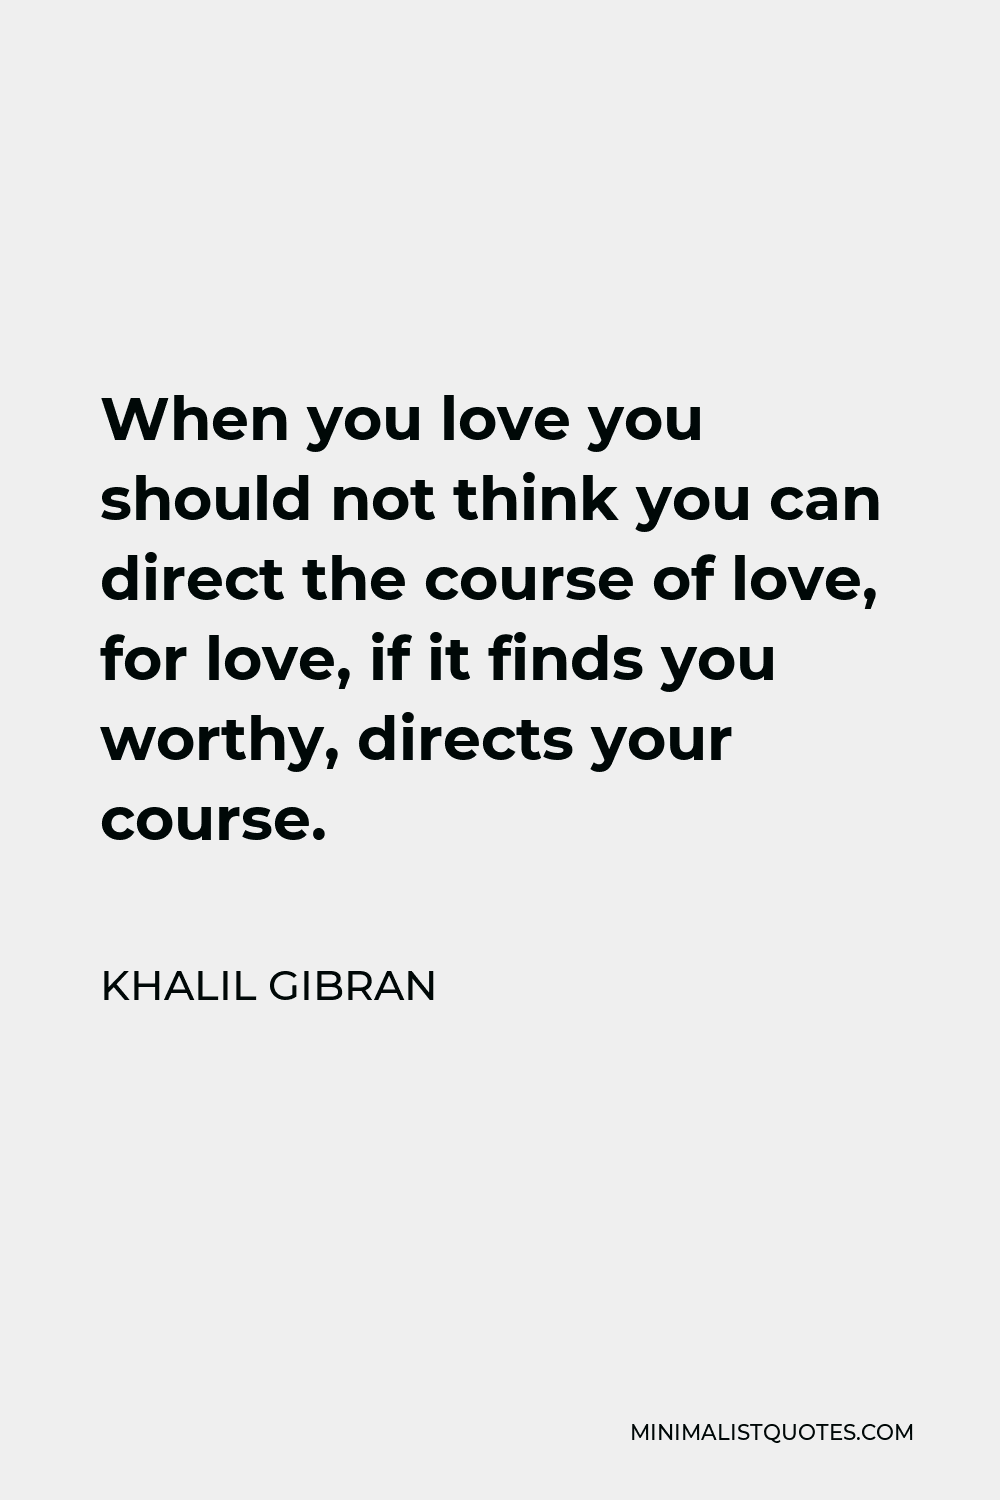 Khalil Gibran Quote - When you love you should not think you can direct the course of love, for love, if it finds you worthy, directs your course.